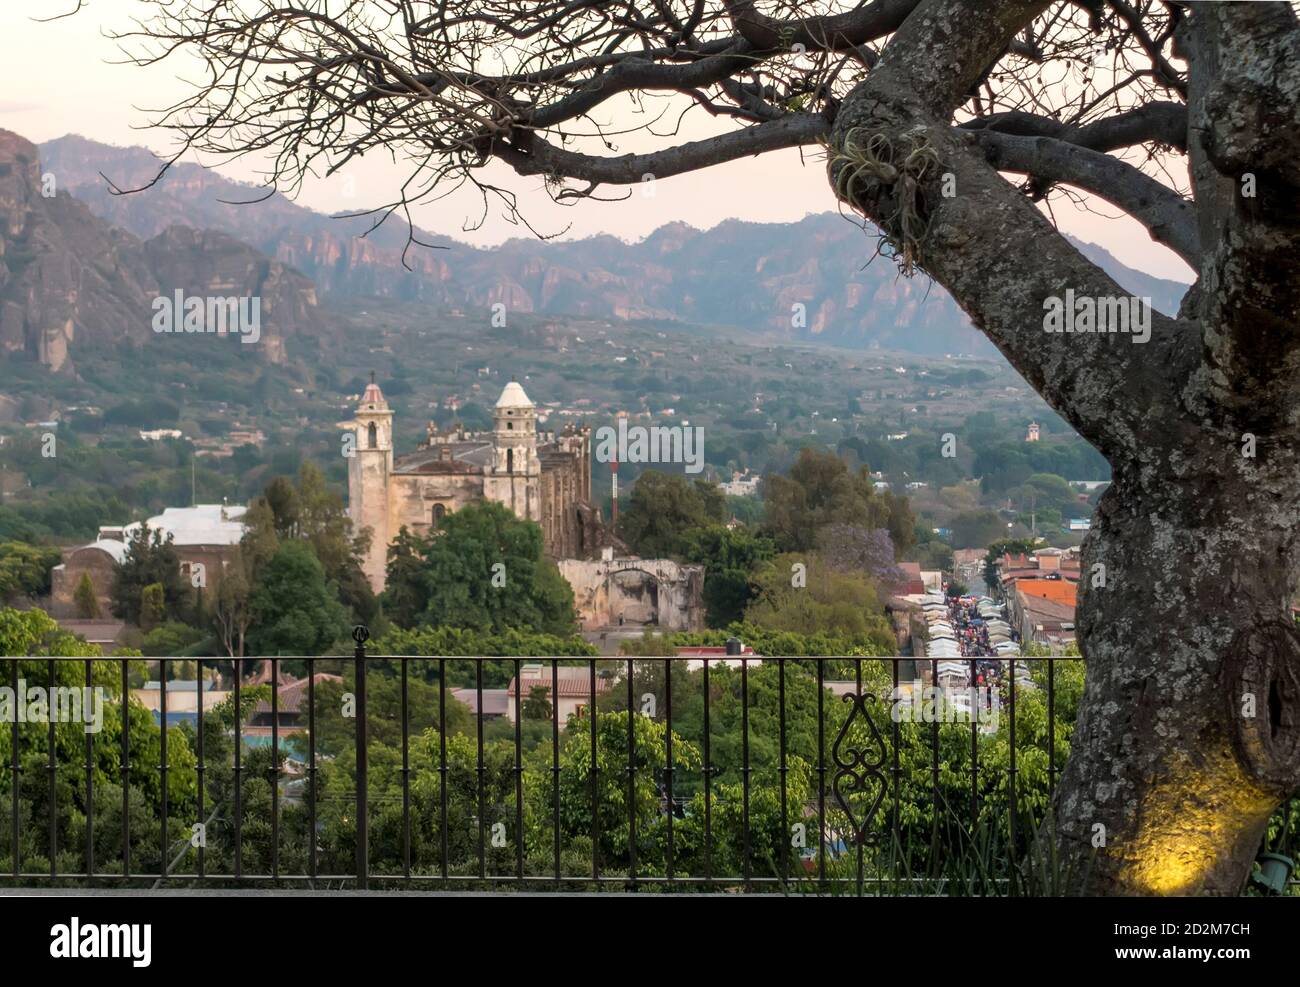 Tepoztlan, Morelos, Mexico showing the former Dominican convent and the Sunday market. Stock Photo